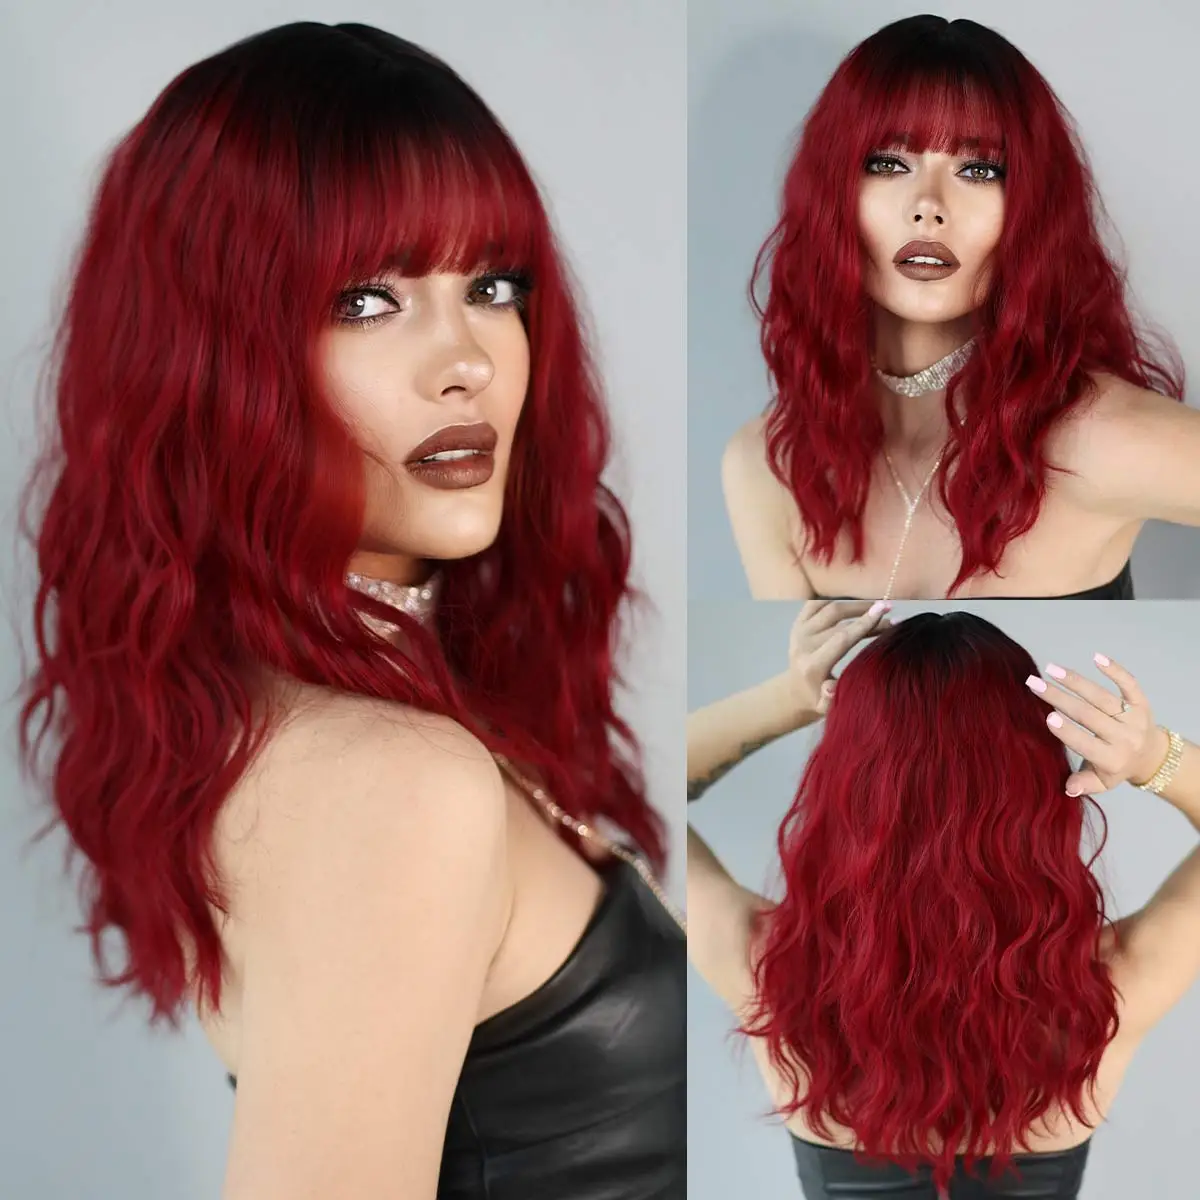 namm-synthetic-wig-for-women-with-bangs-halloween-cosplay-wig-water-wave-wine-red-hair-natural-heat-resistant-hair-wavy-wigs